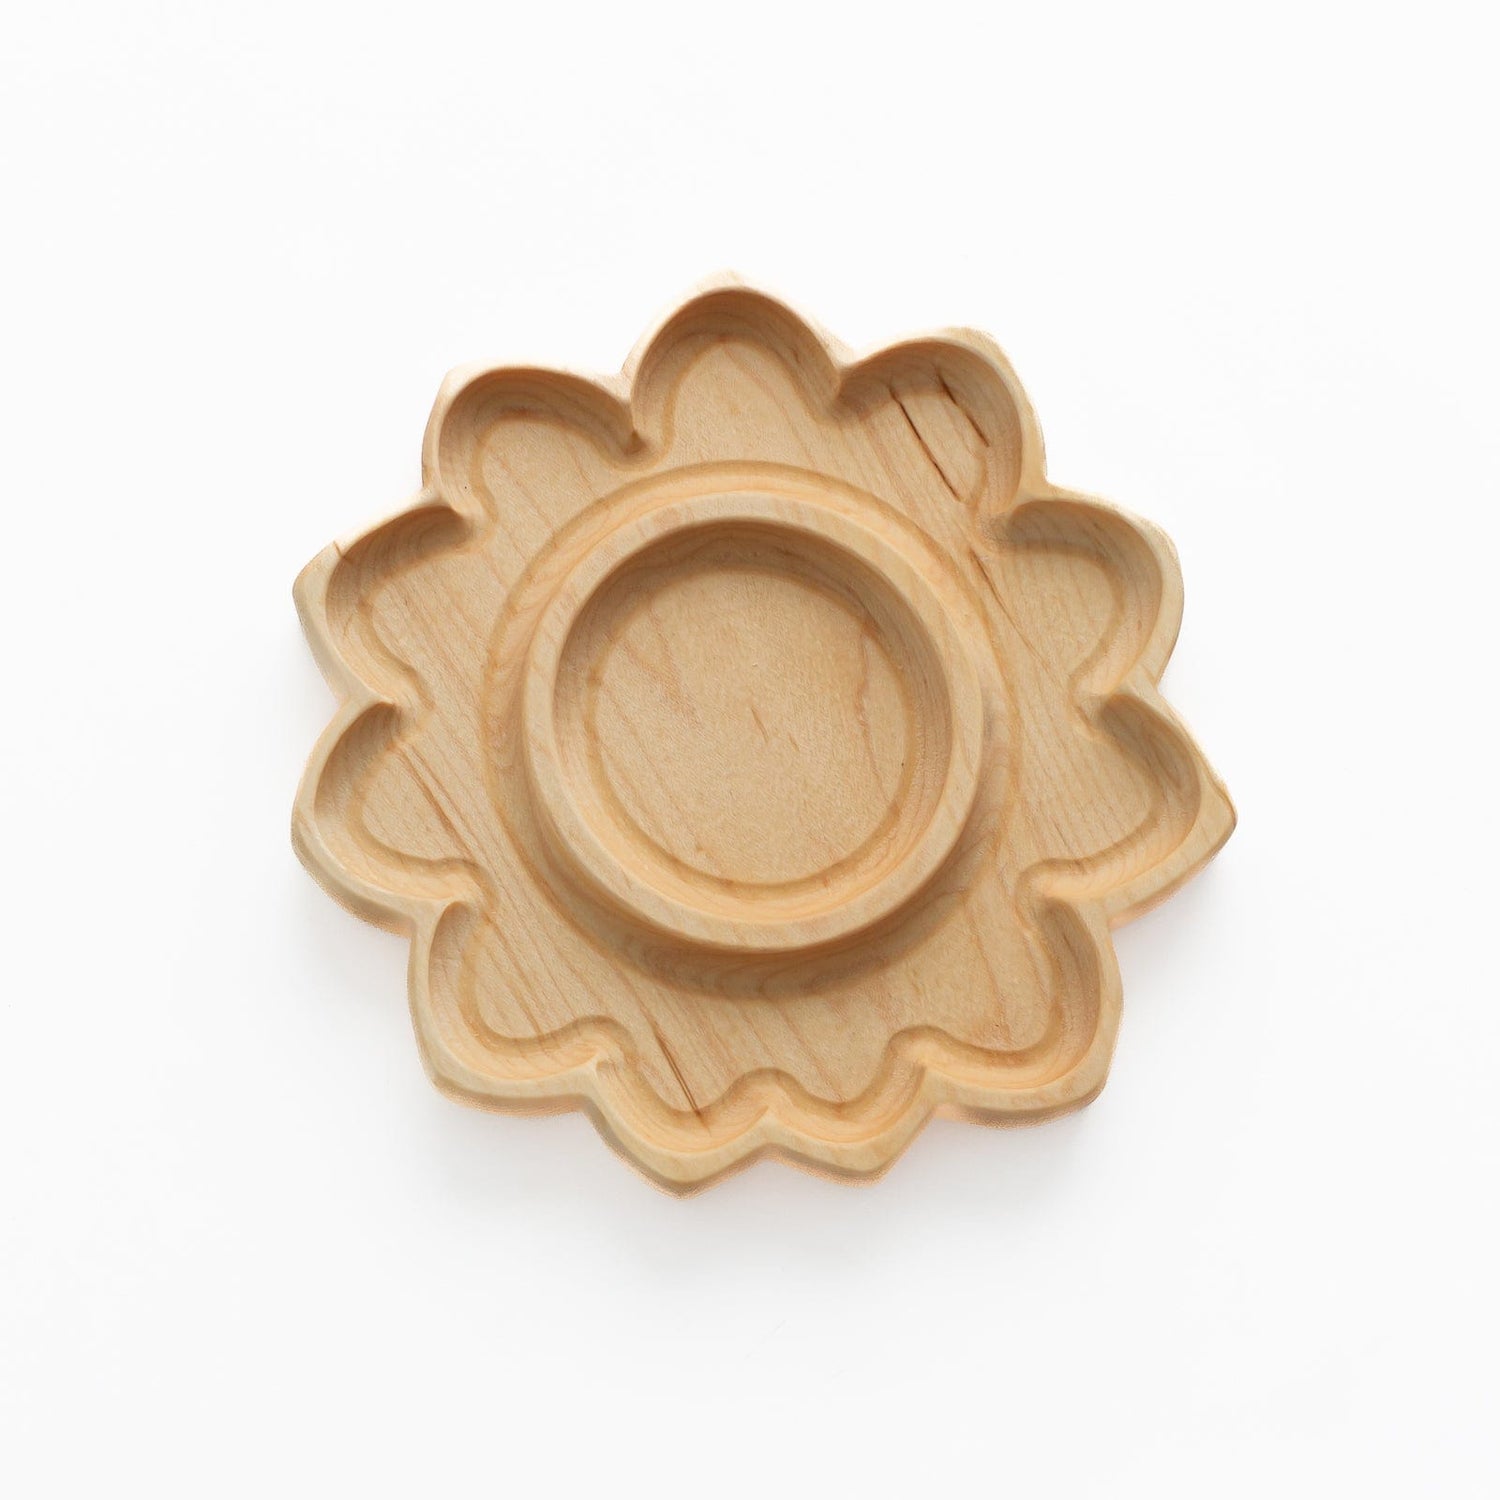 Aw & Co. Sensory Play Wooden Sunflower Plate / Sensory Tray (Made in Canada)